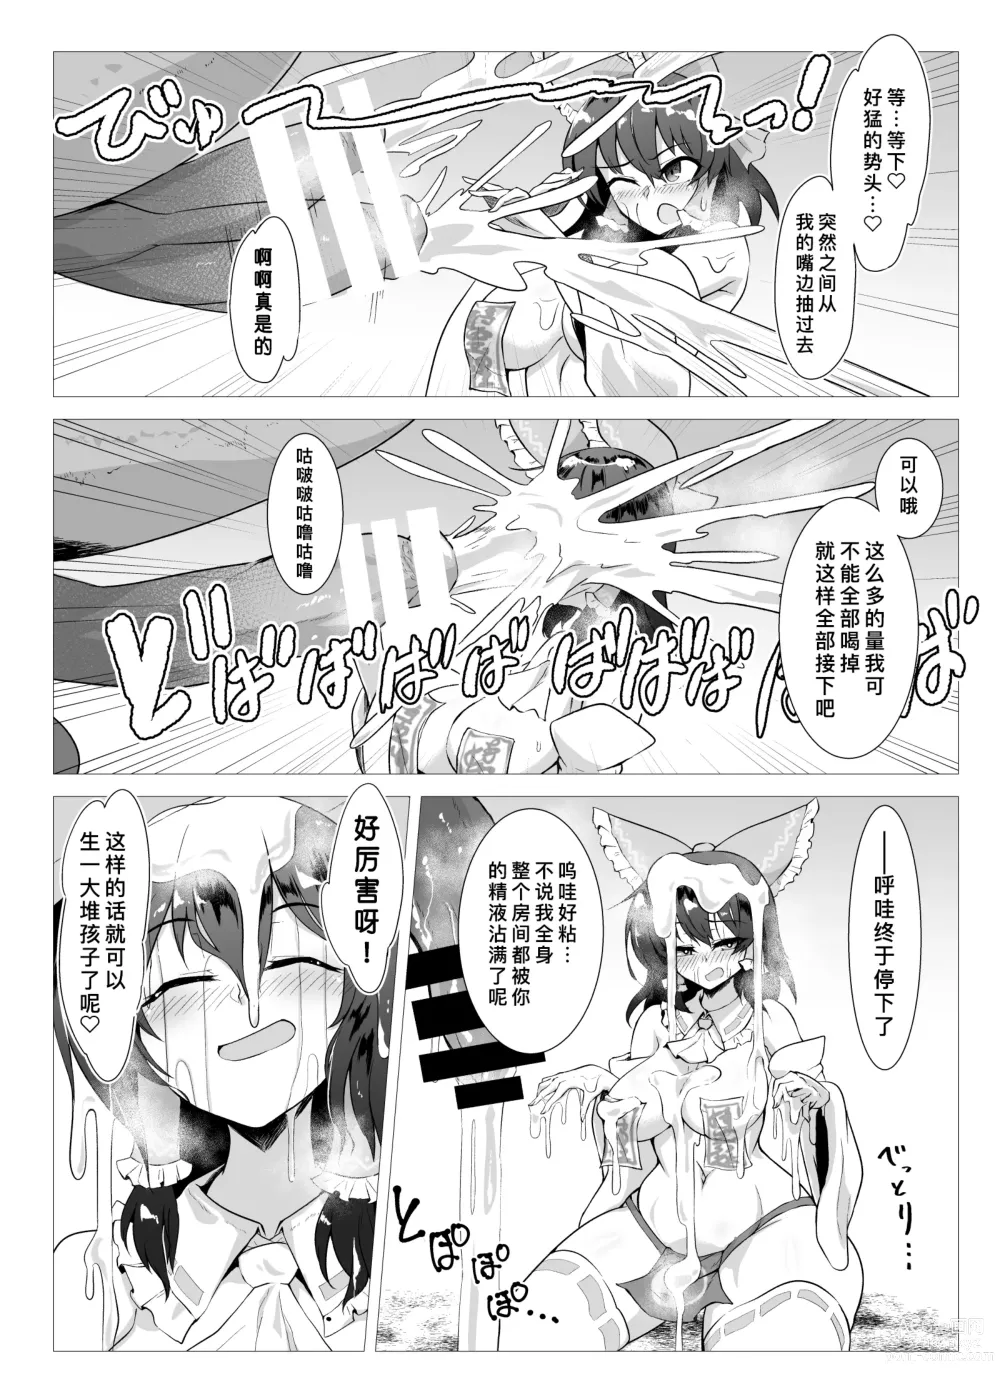 Page 8 of doujinshi 马巫女灵梦